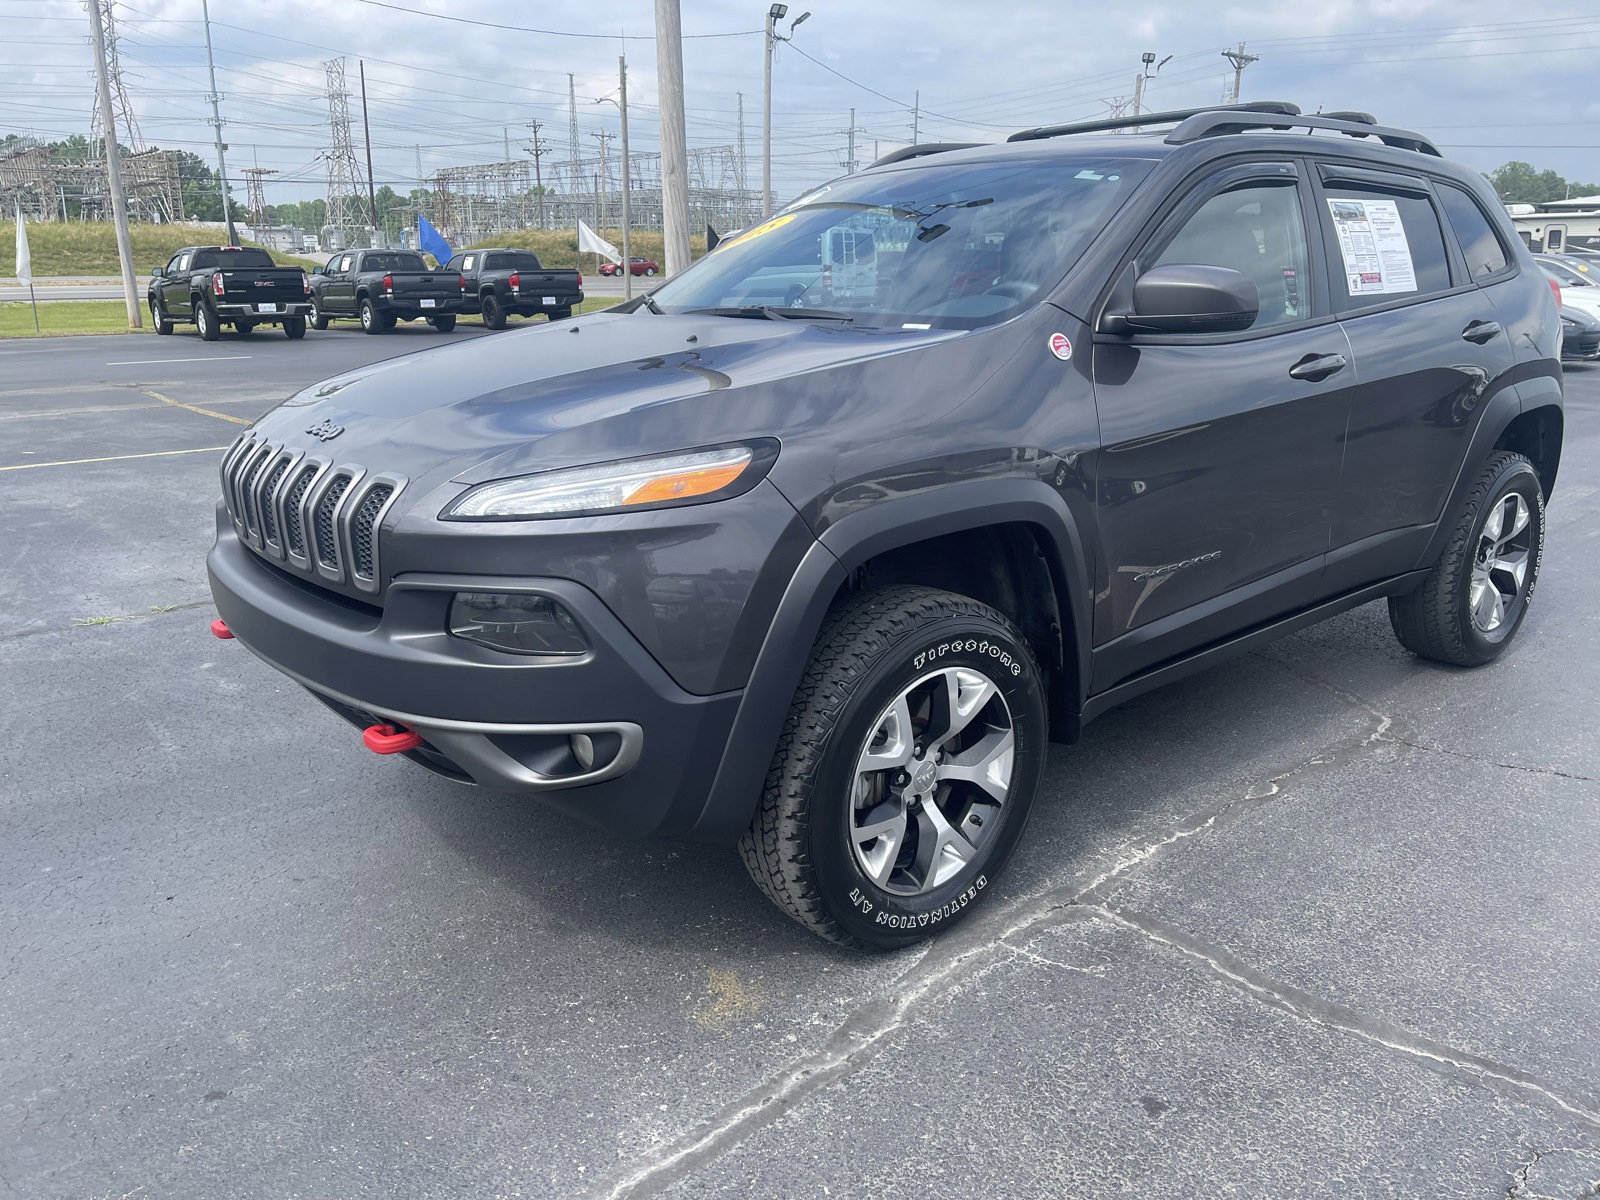 Used 2015 Jeep Cherokee Trailhawk with VIN 1C4PJMBS8FW511043 for sale in Cullman, AL